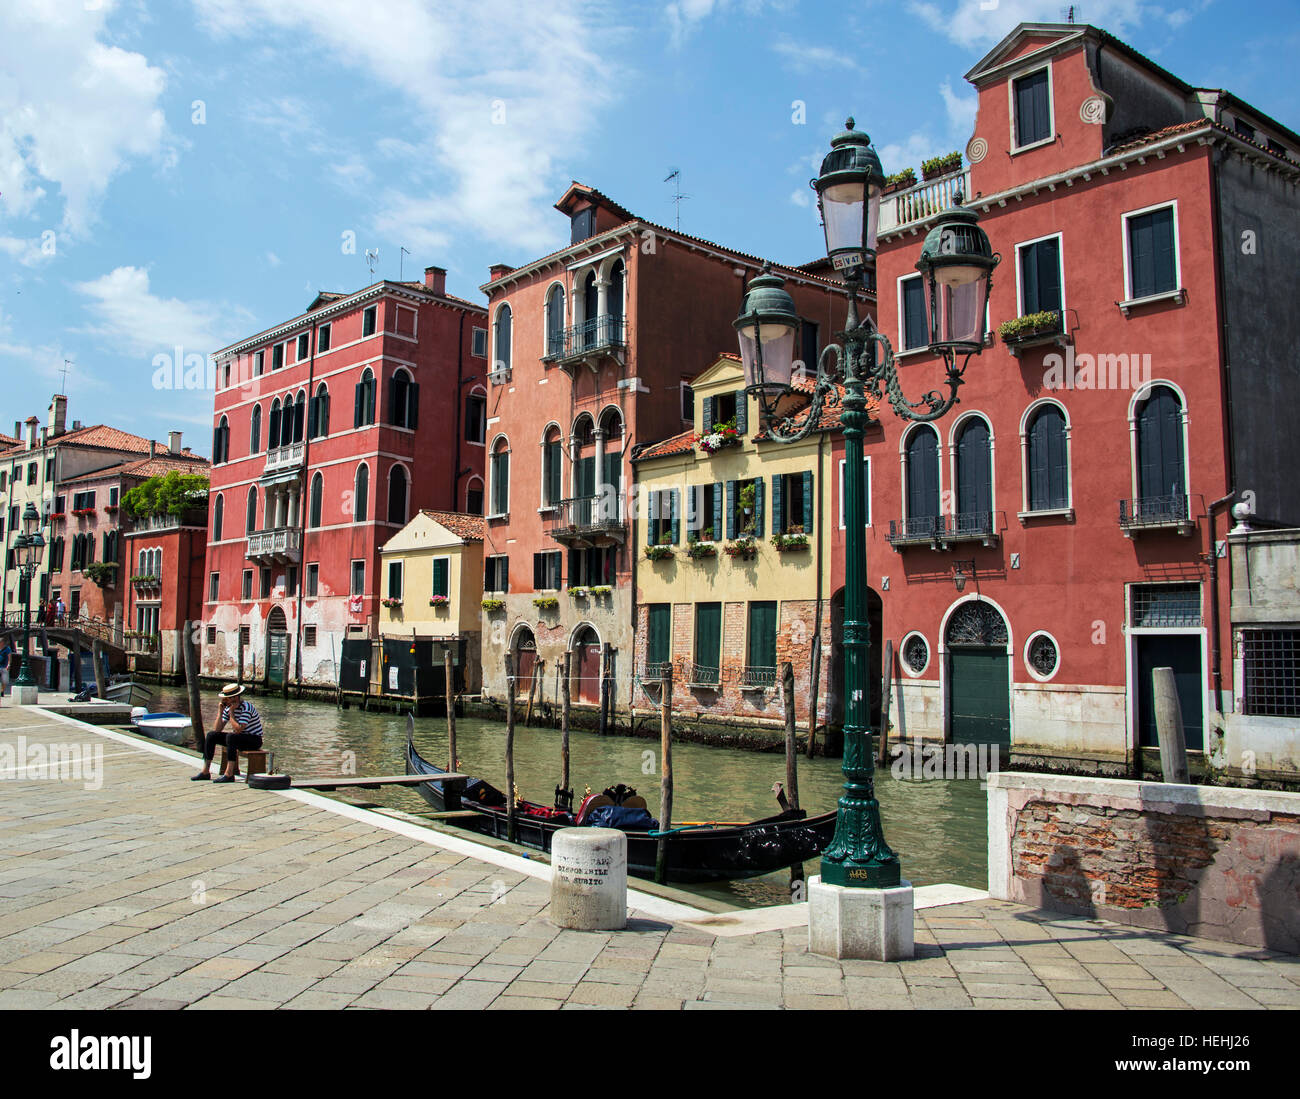 Venice architecture, colorful traditional venetian apartments  overlooking a canal with gondola in the foreground Stock Photo